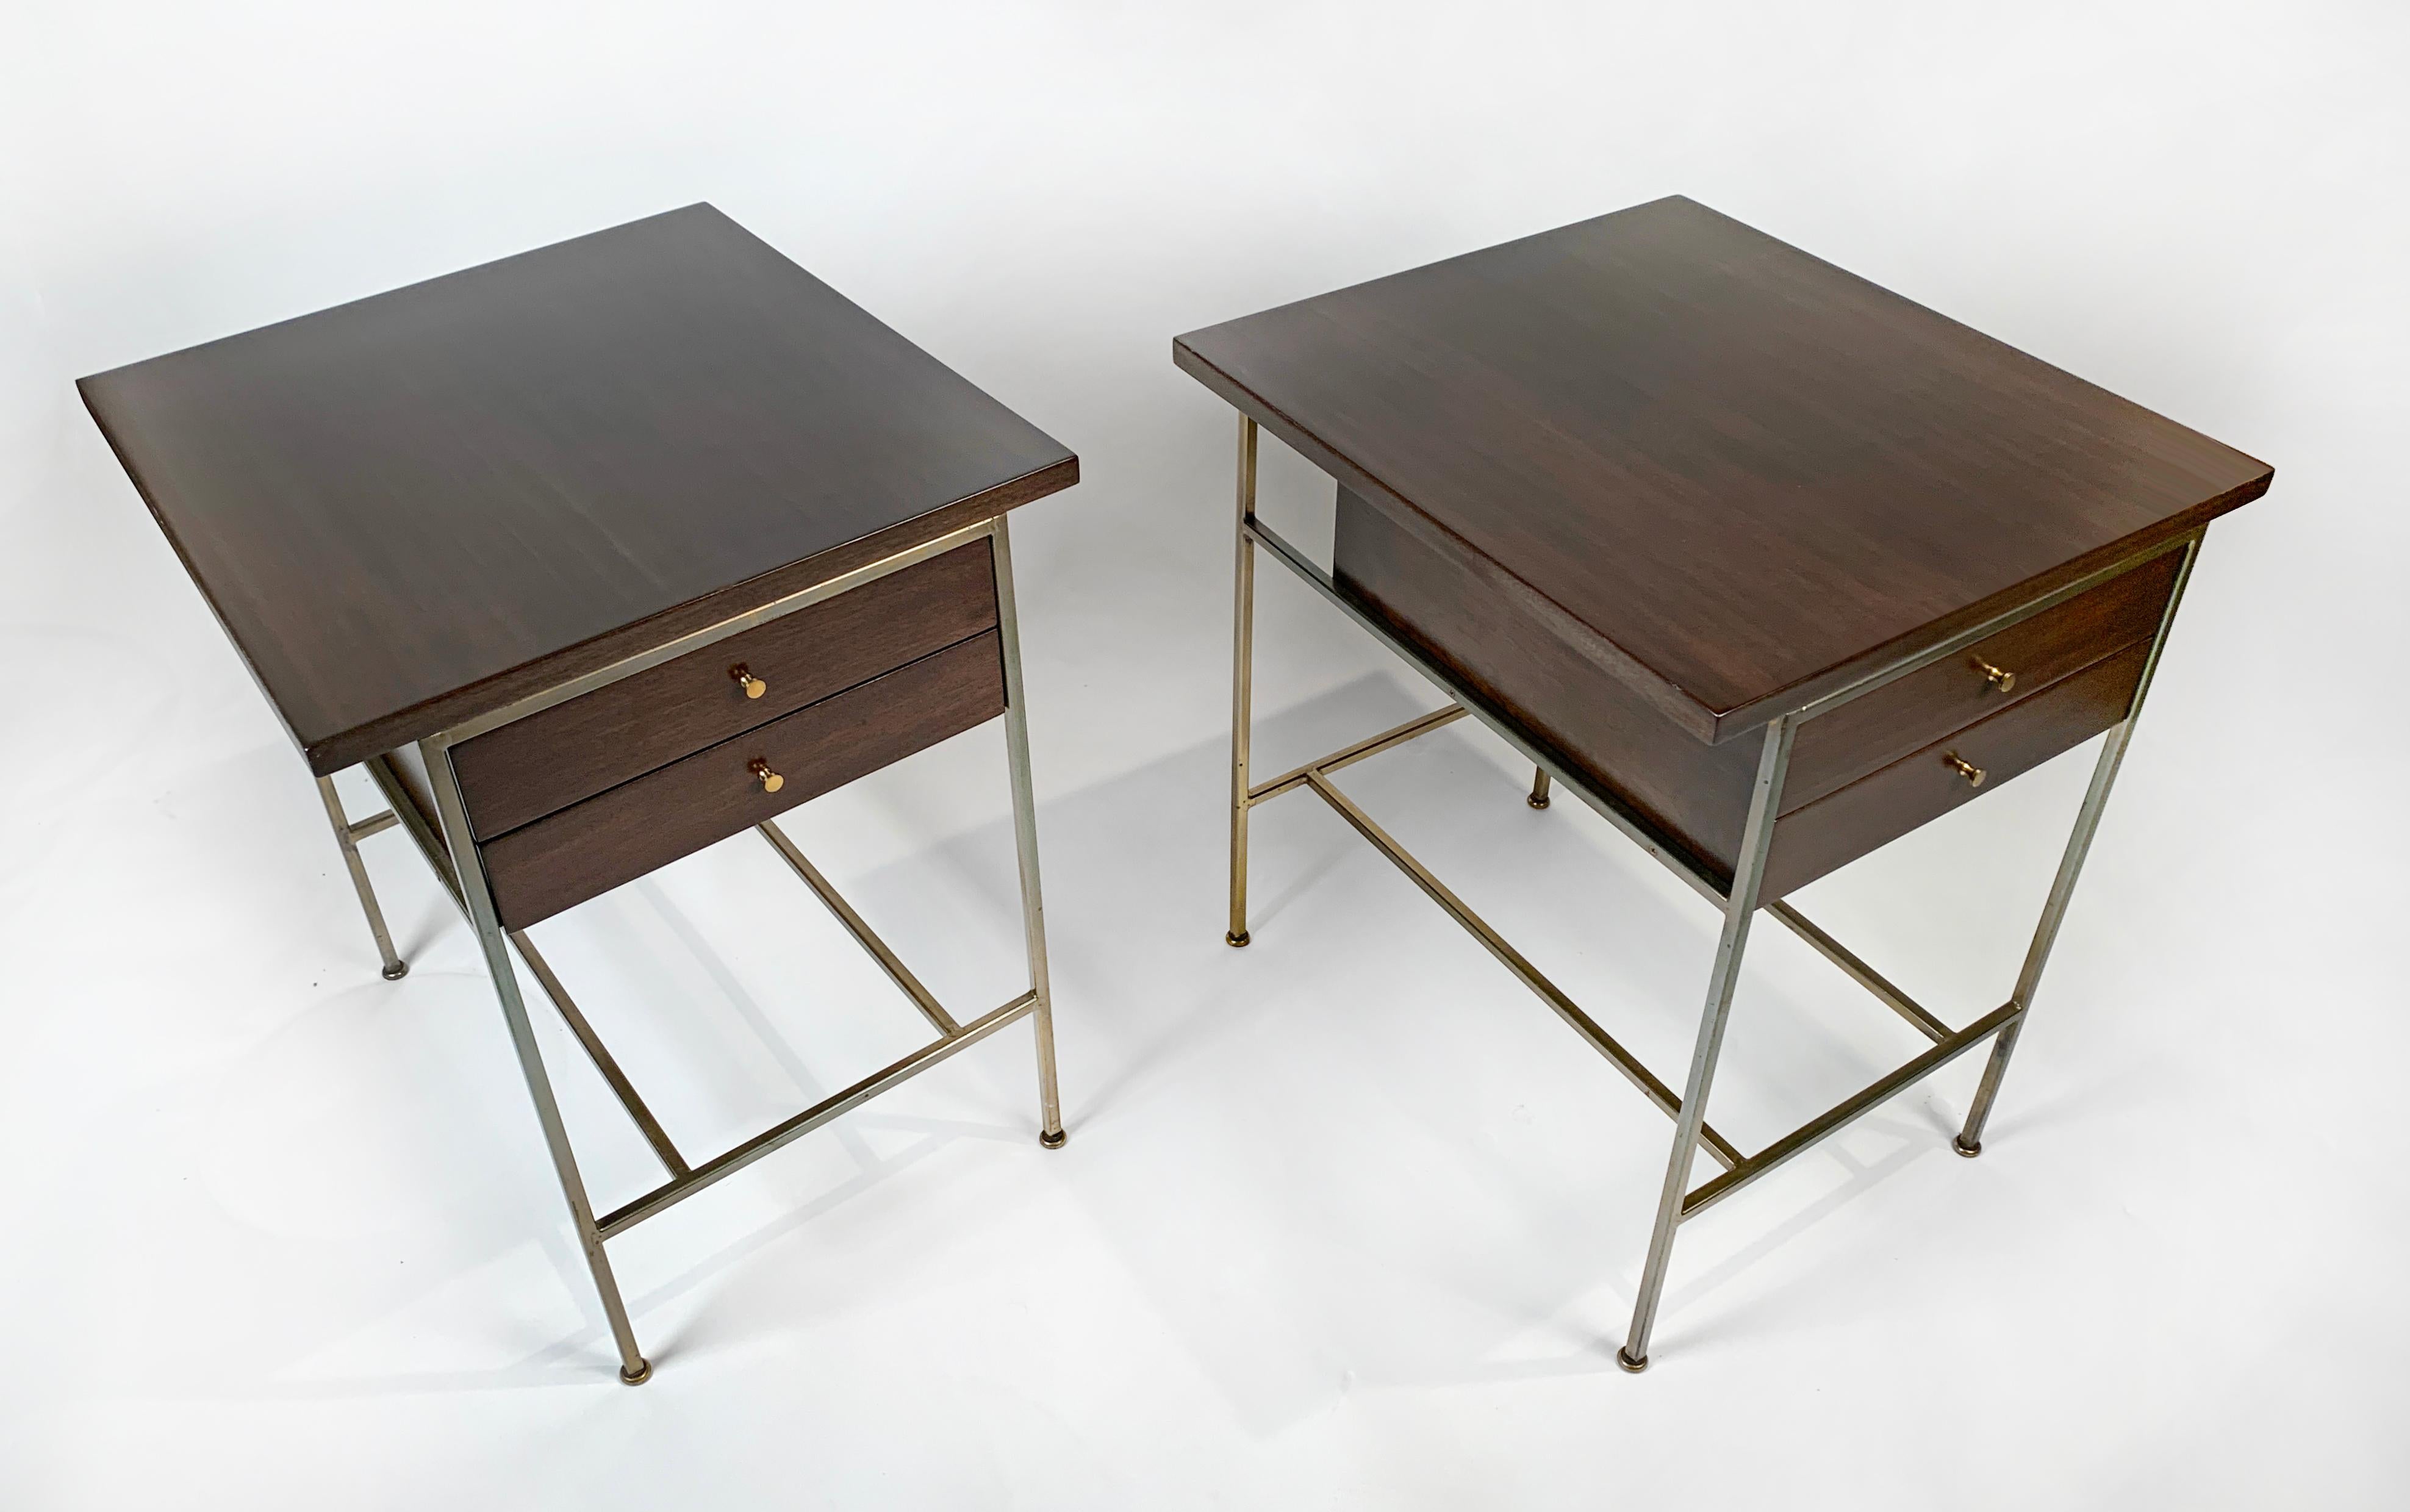 An early pair of Paul McCobb designed nightstands from his Irwin collection retaining the early 